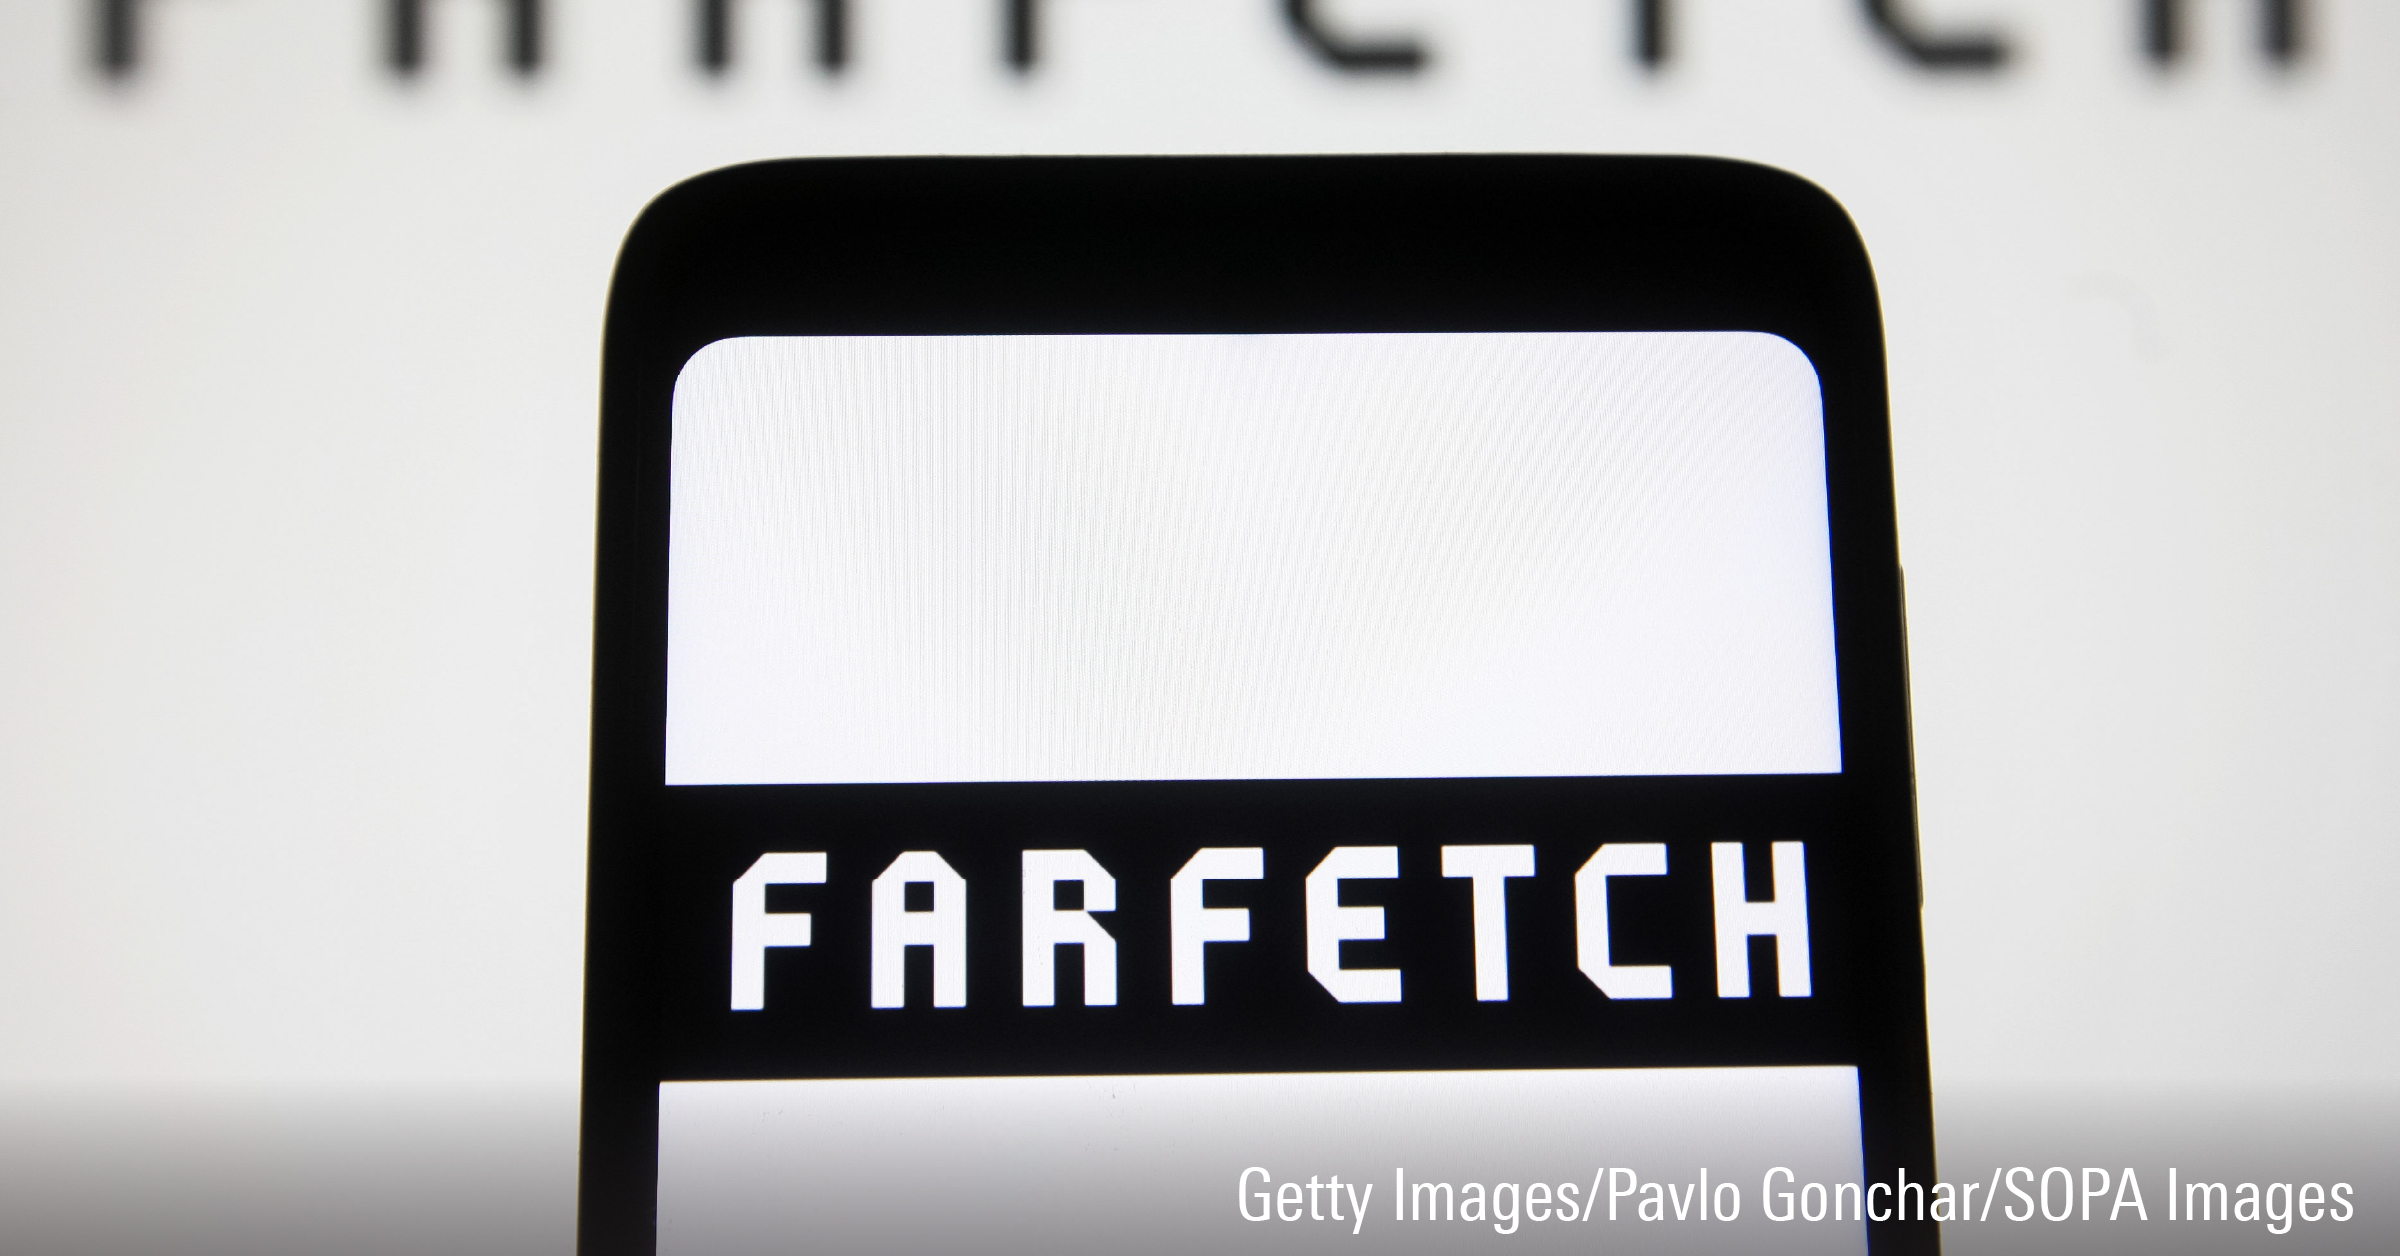 In this photo illustration, the Farfetch logo is displayed on a smartphone screen.